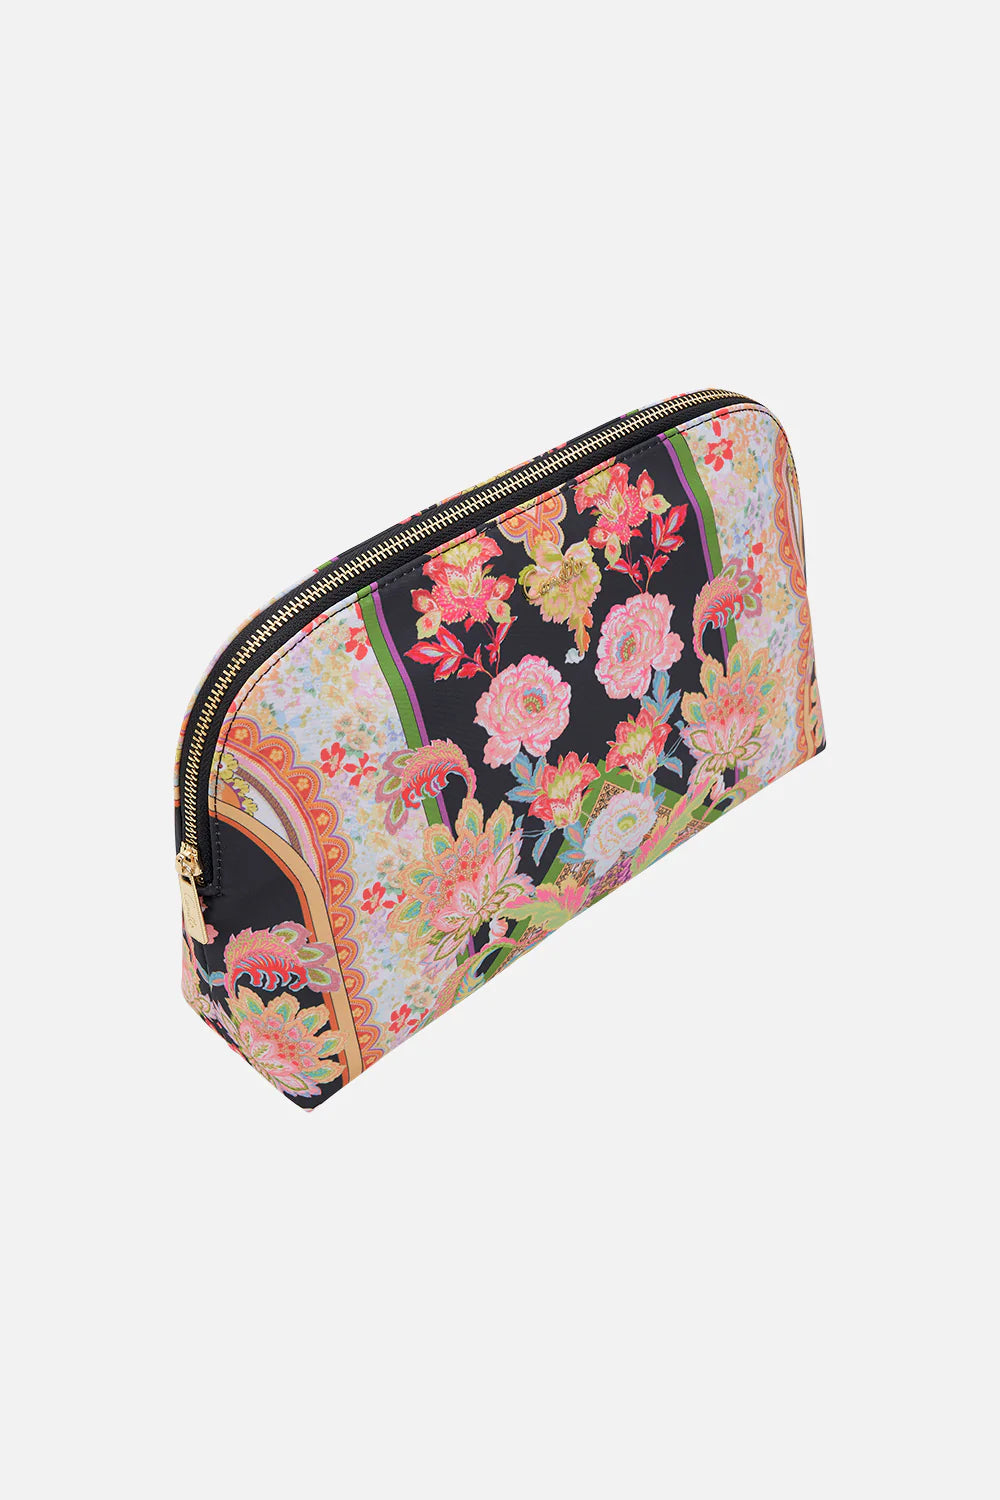 Camilla Sundowners In Sicily Large Cosmetic Case